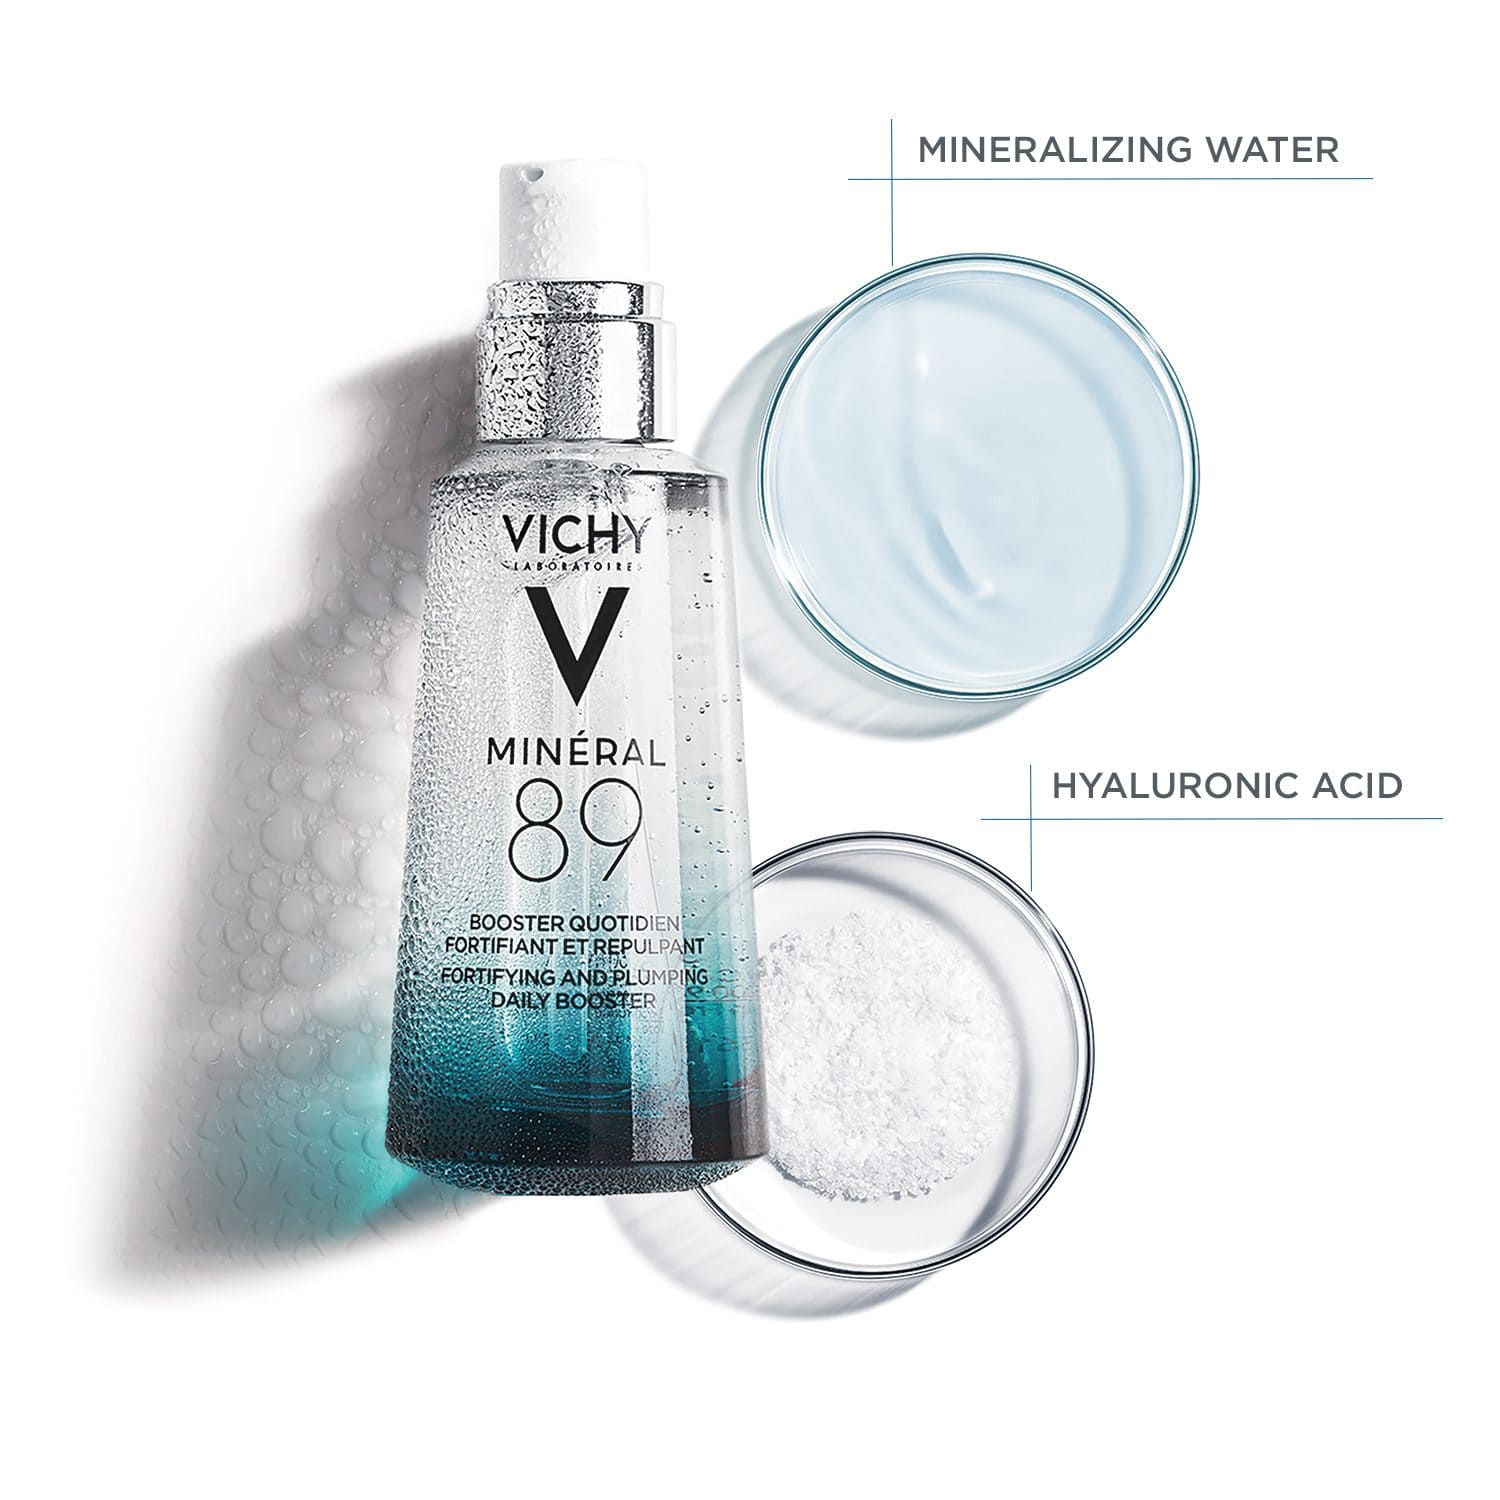 Serum Vichy Mineral 89 Daily Booster Serum and Moisturizer